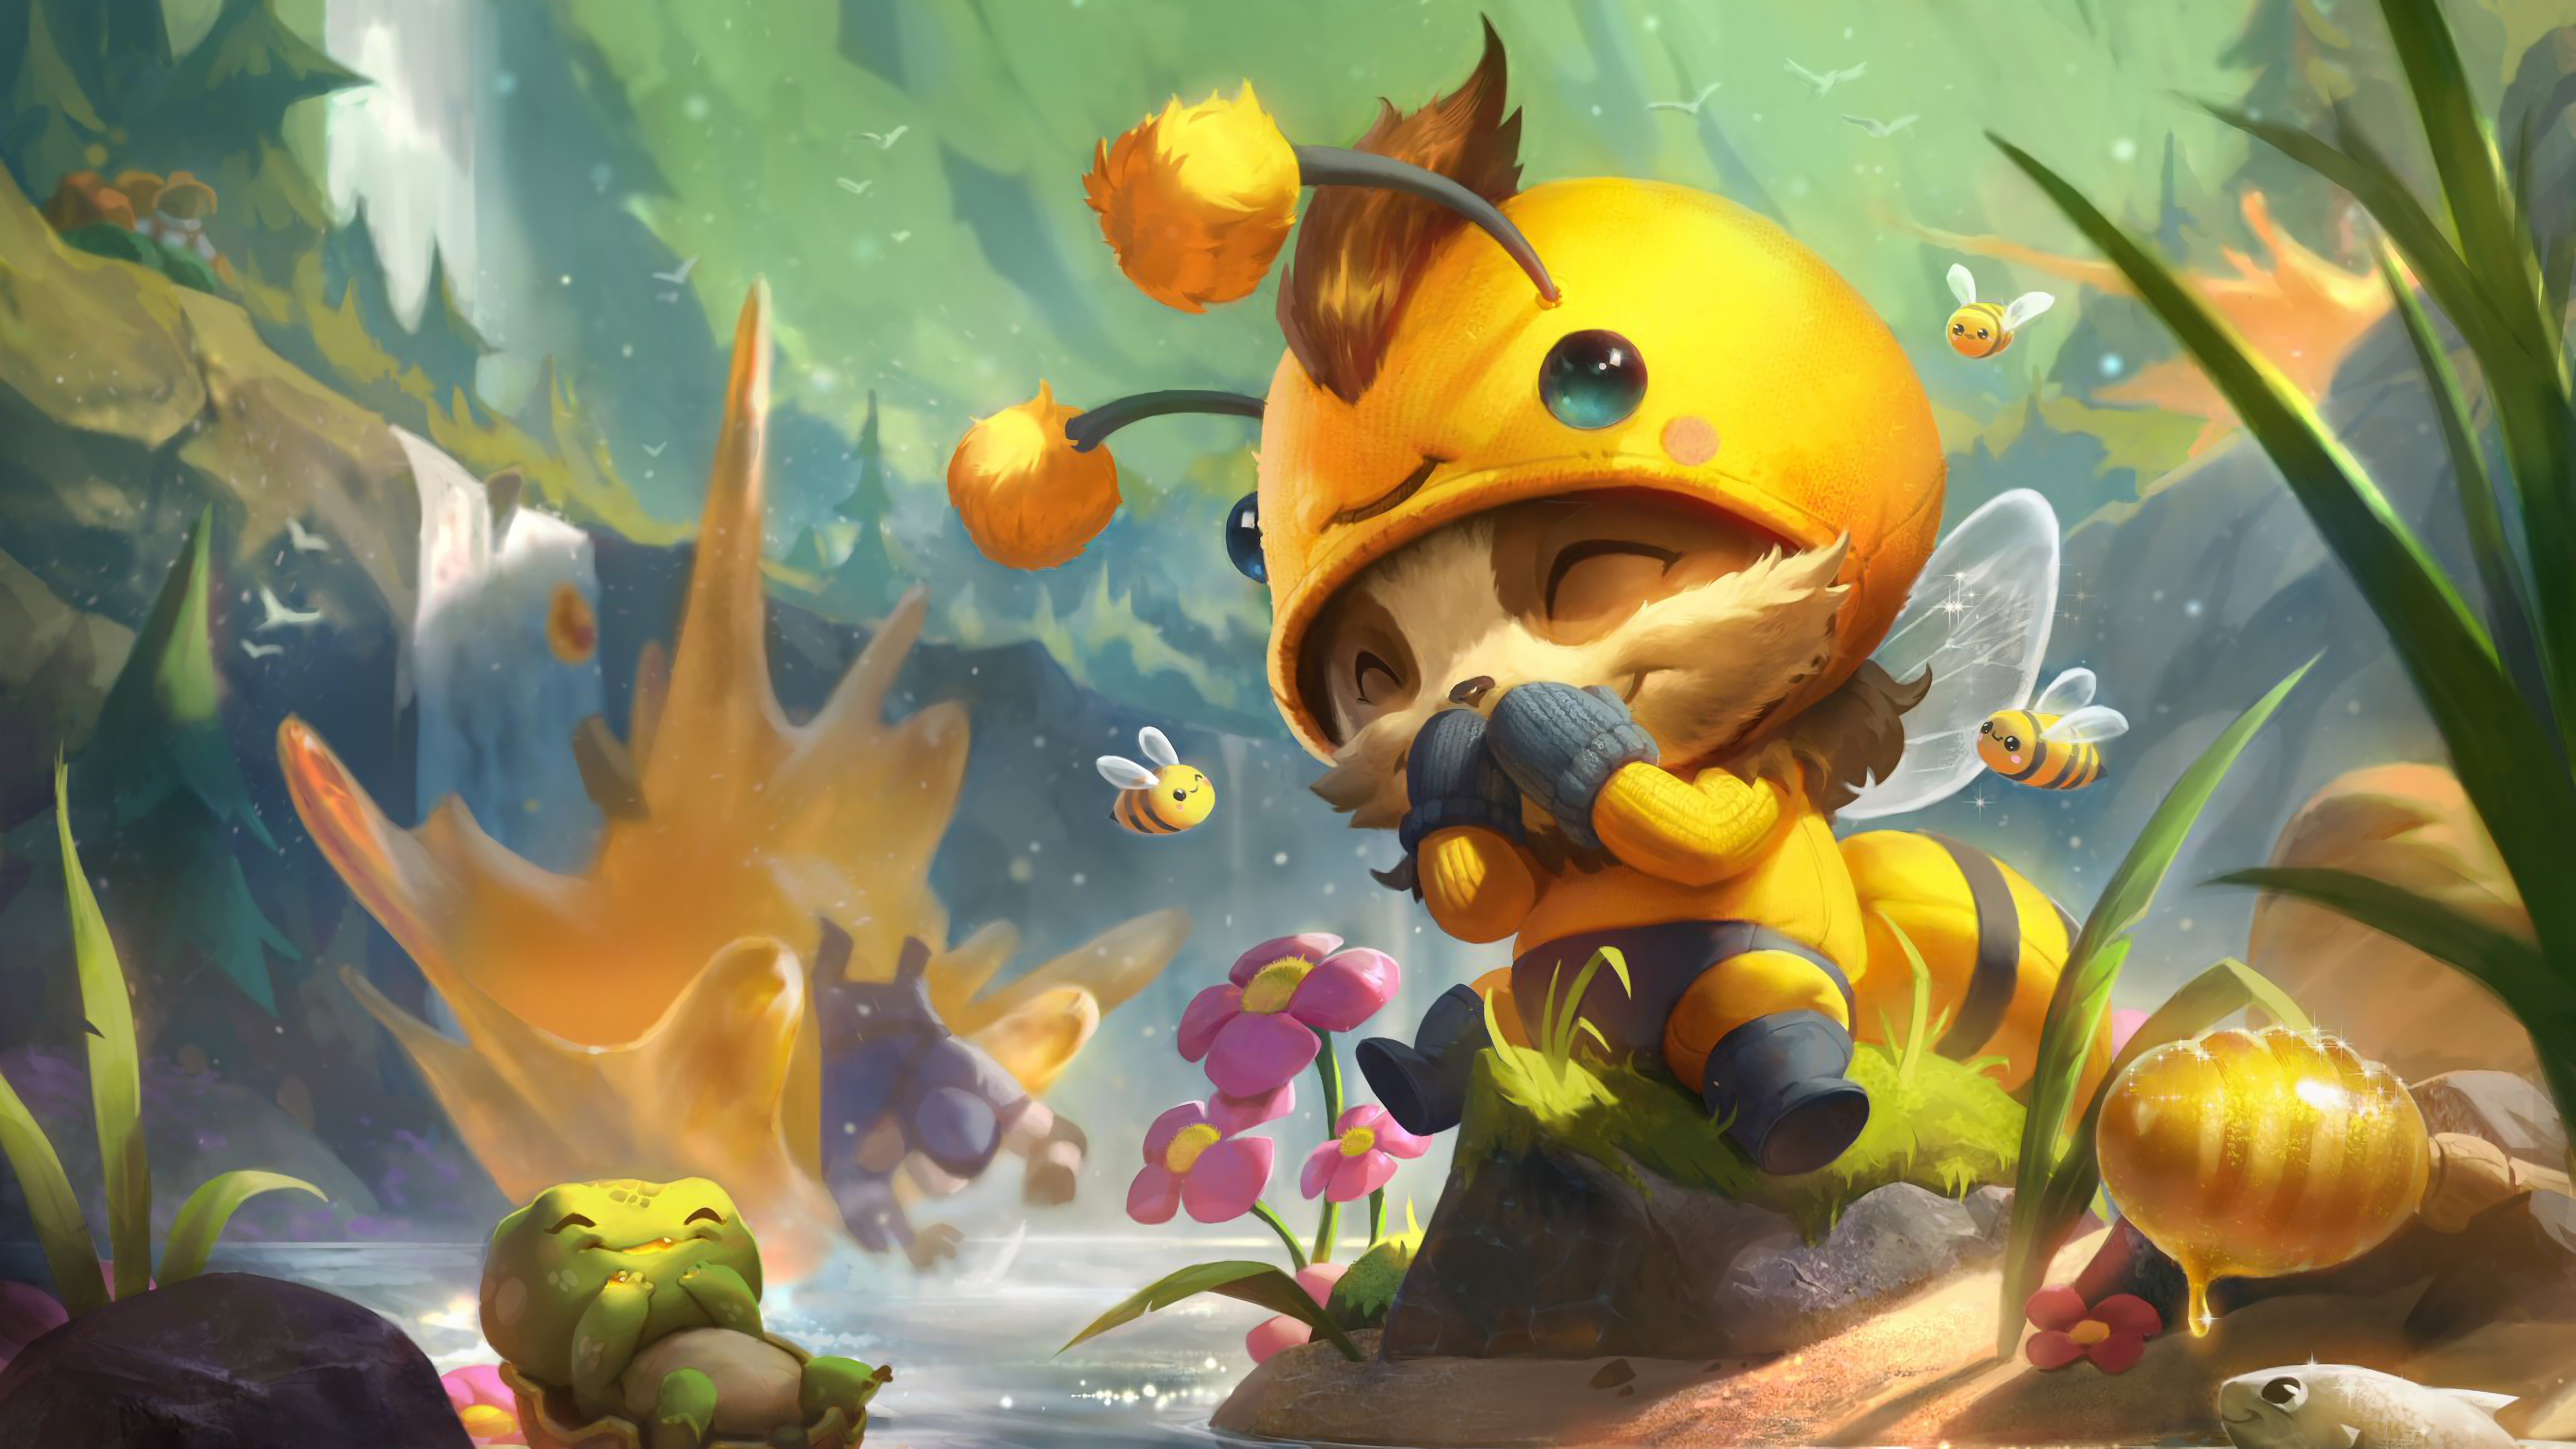 General 7680x4320 Bee (League of Legends) digital art Riot Games GZG video games Teemo (League of Legends) Teemo League of Legends 4K video game characters video game art water waterfall leaves bees insect smiling closed eyes gloves honey